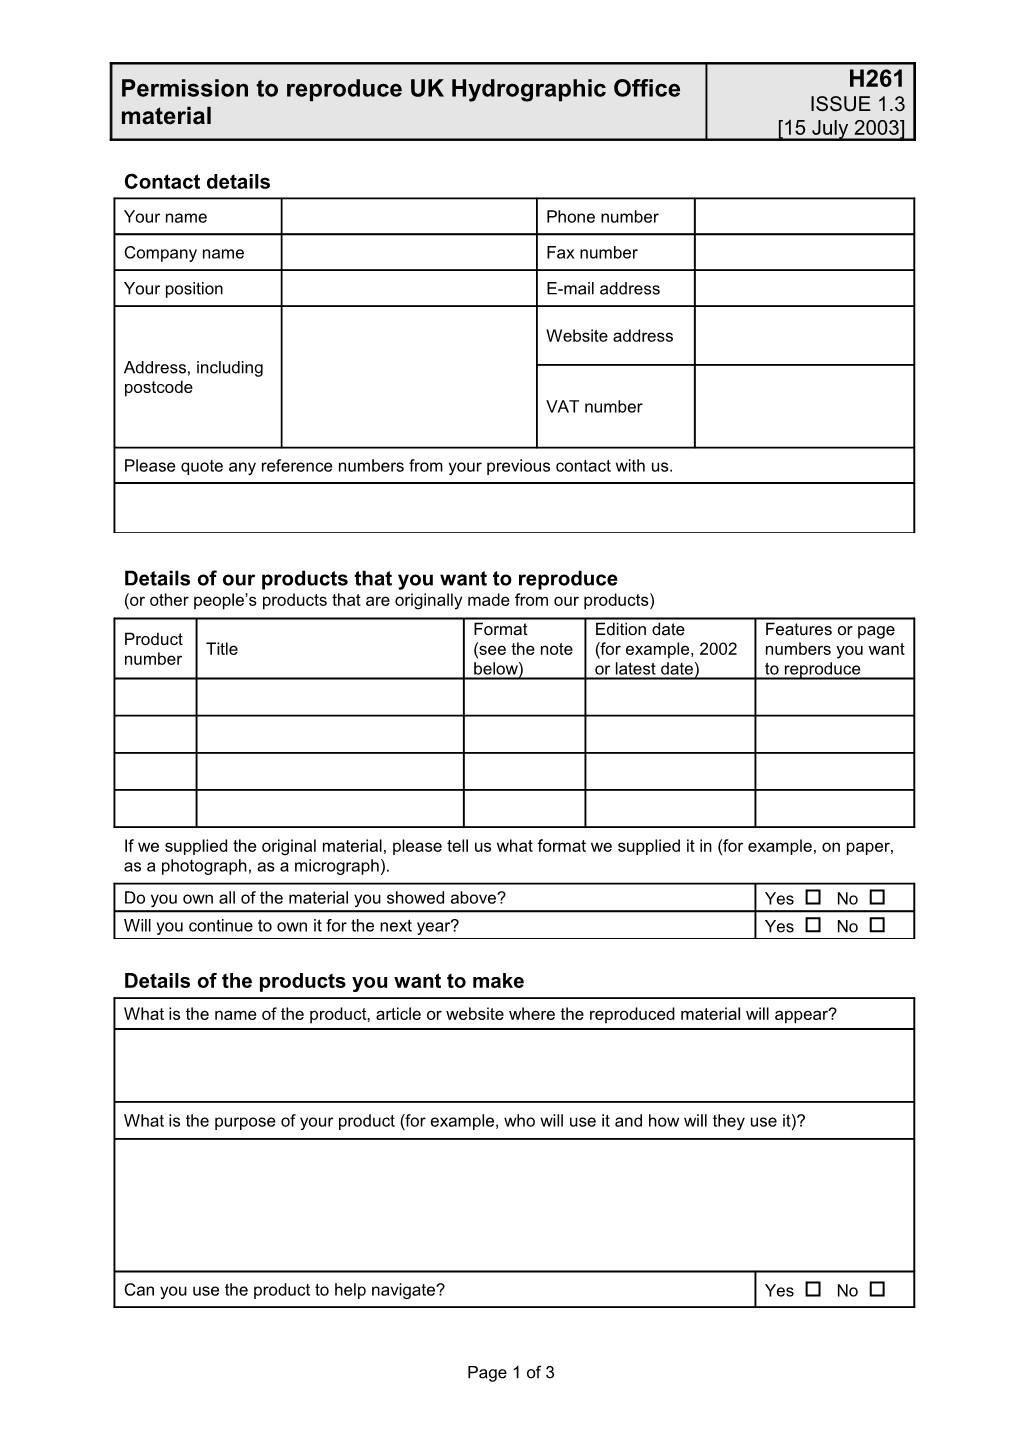 Please Return This Form to the Copyright Section, by Post to the UK Hydrographic Office